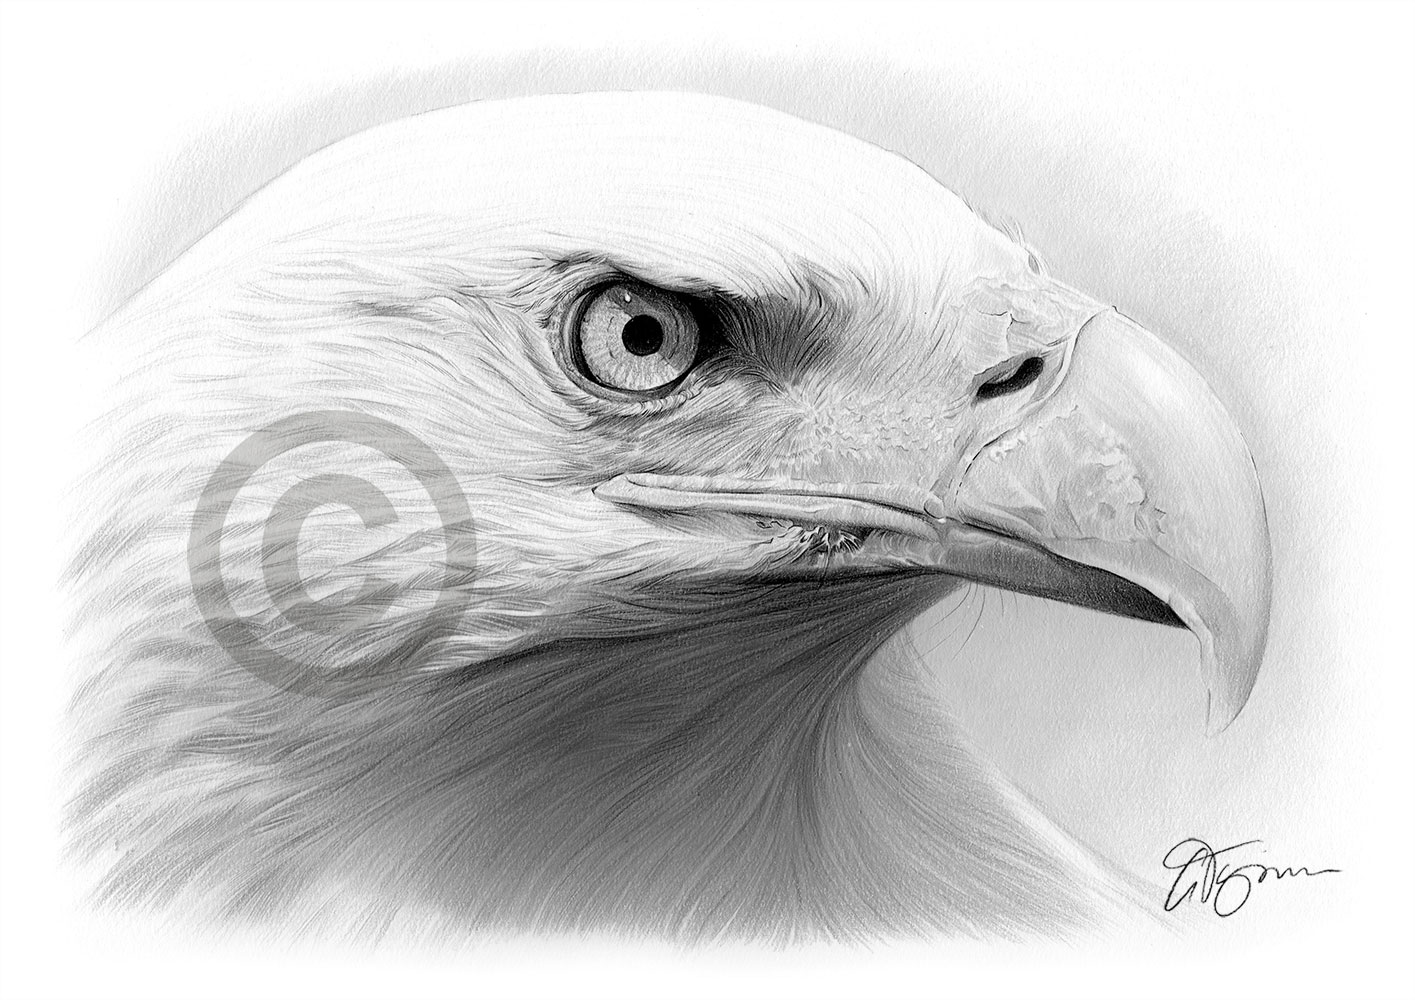 Pencil drawing of a bald eagle by artist Gary Tymon